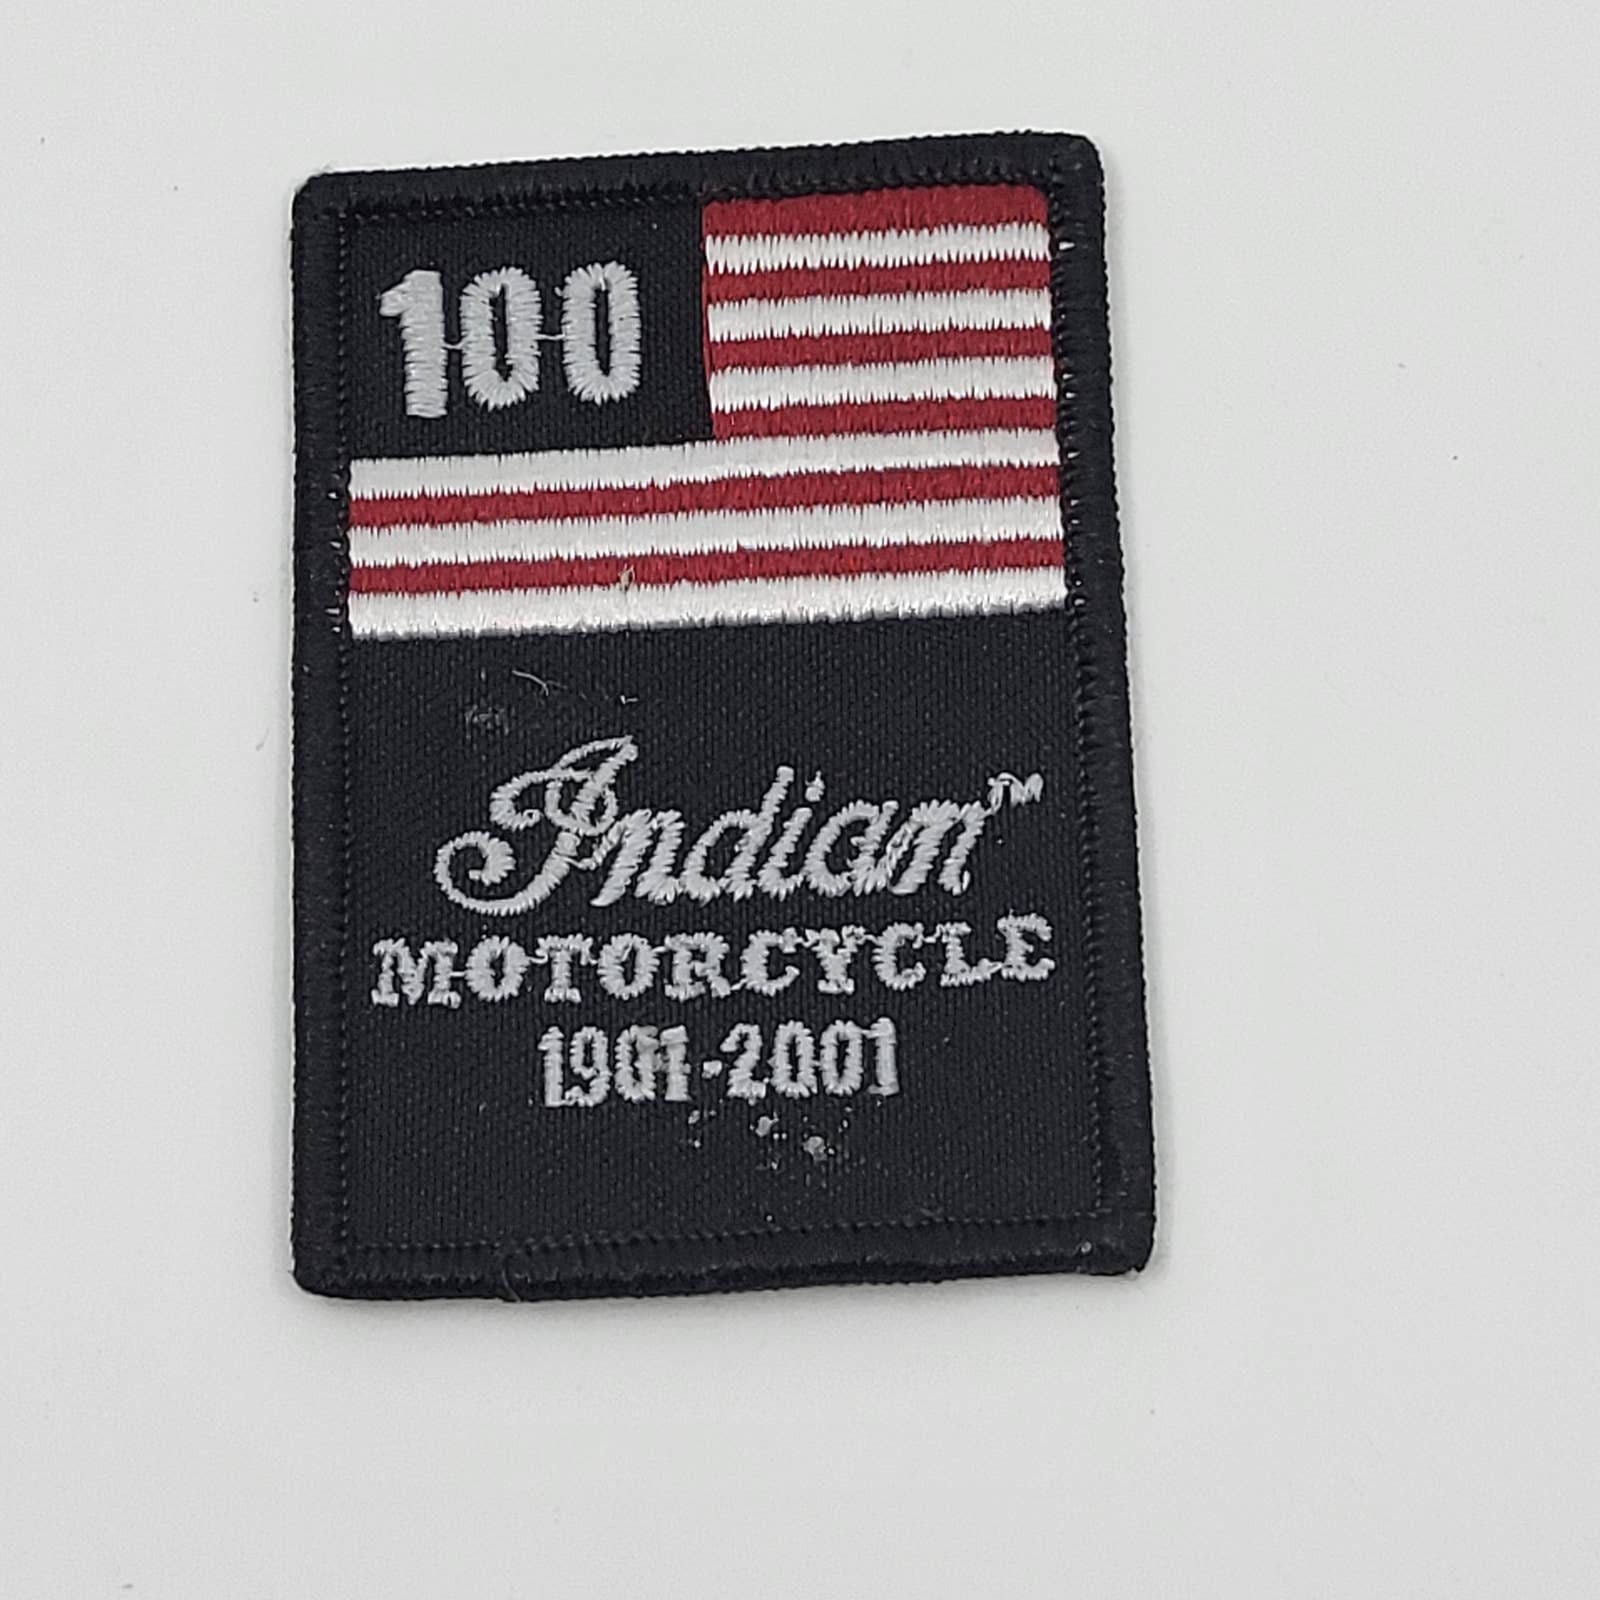 Indian Motorcycles Embroidered Iron Patches for Clothing